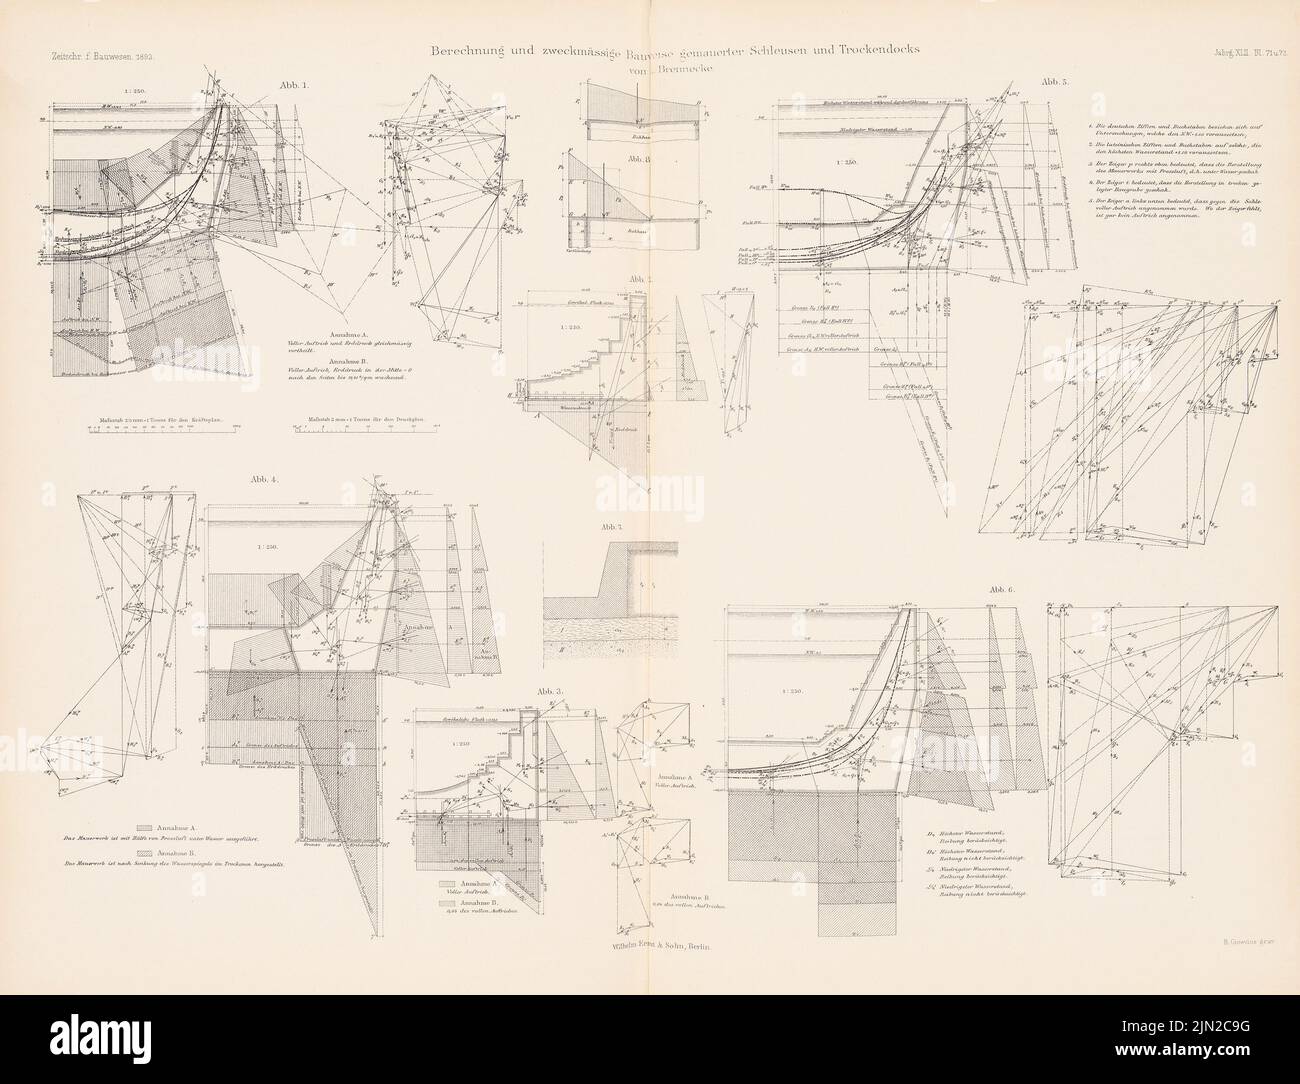 Burning corner, calculation and functional construction of brick locks and dry docks. (From: Atlas to the magazine for Building, ed. V. Ministry of Public Works, Jg. 42, 1892): Cuts. Stitch on paper, 43.5 x 56.8 cm (including scan edges) Stock Photo